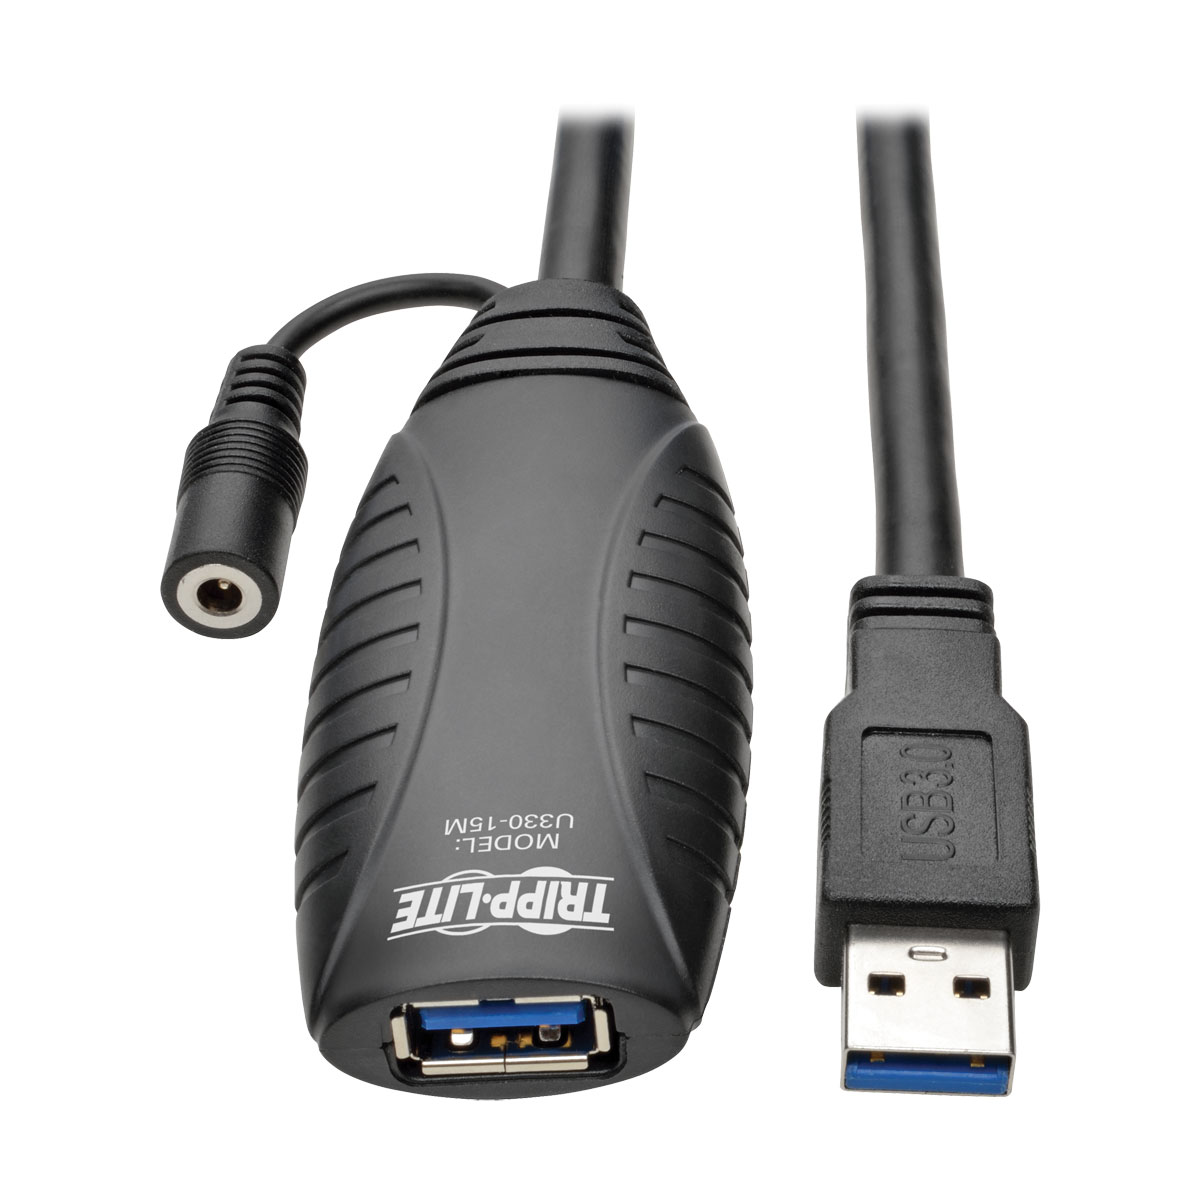 USB 3.0 SuperSpeed Active Extension Repeater Cable, 5M